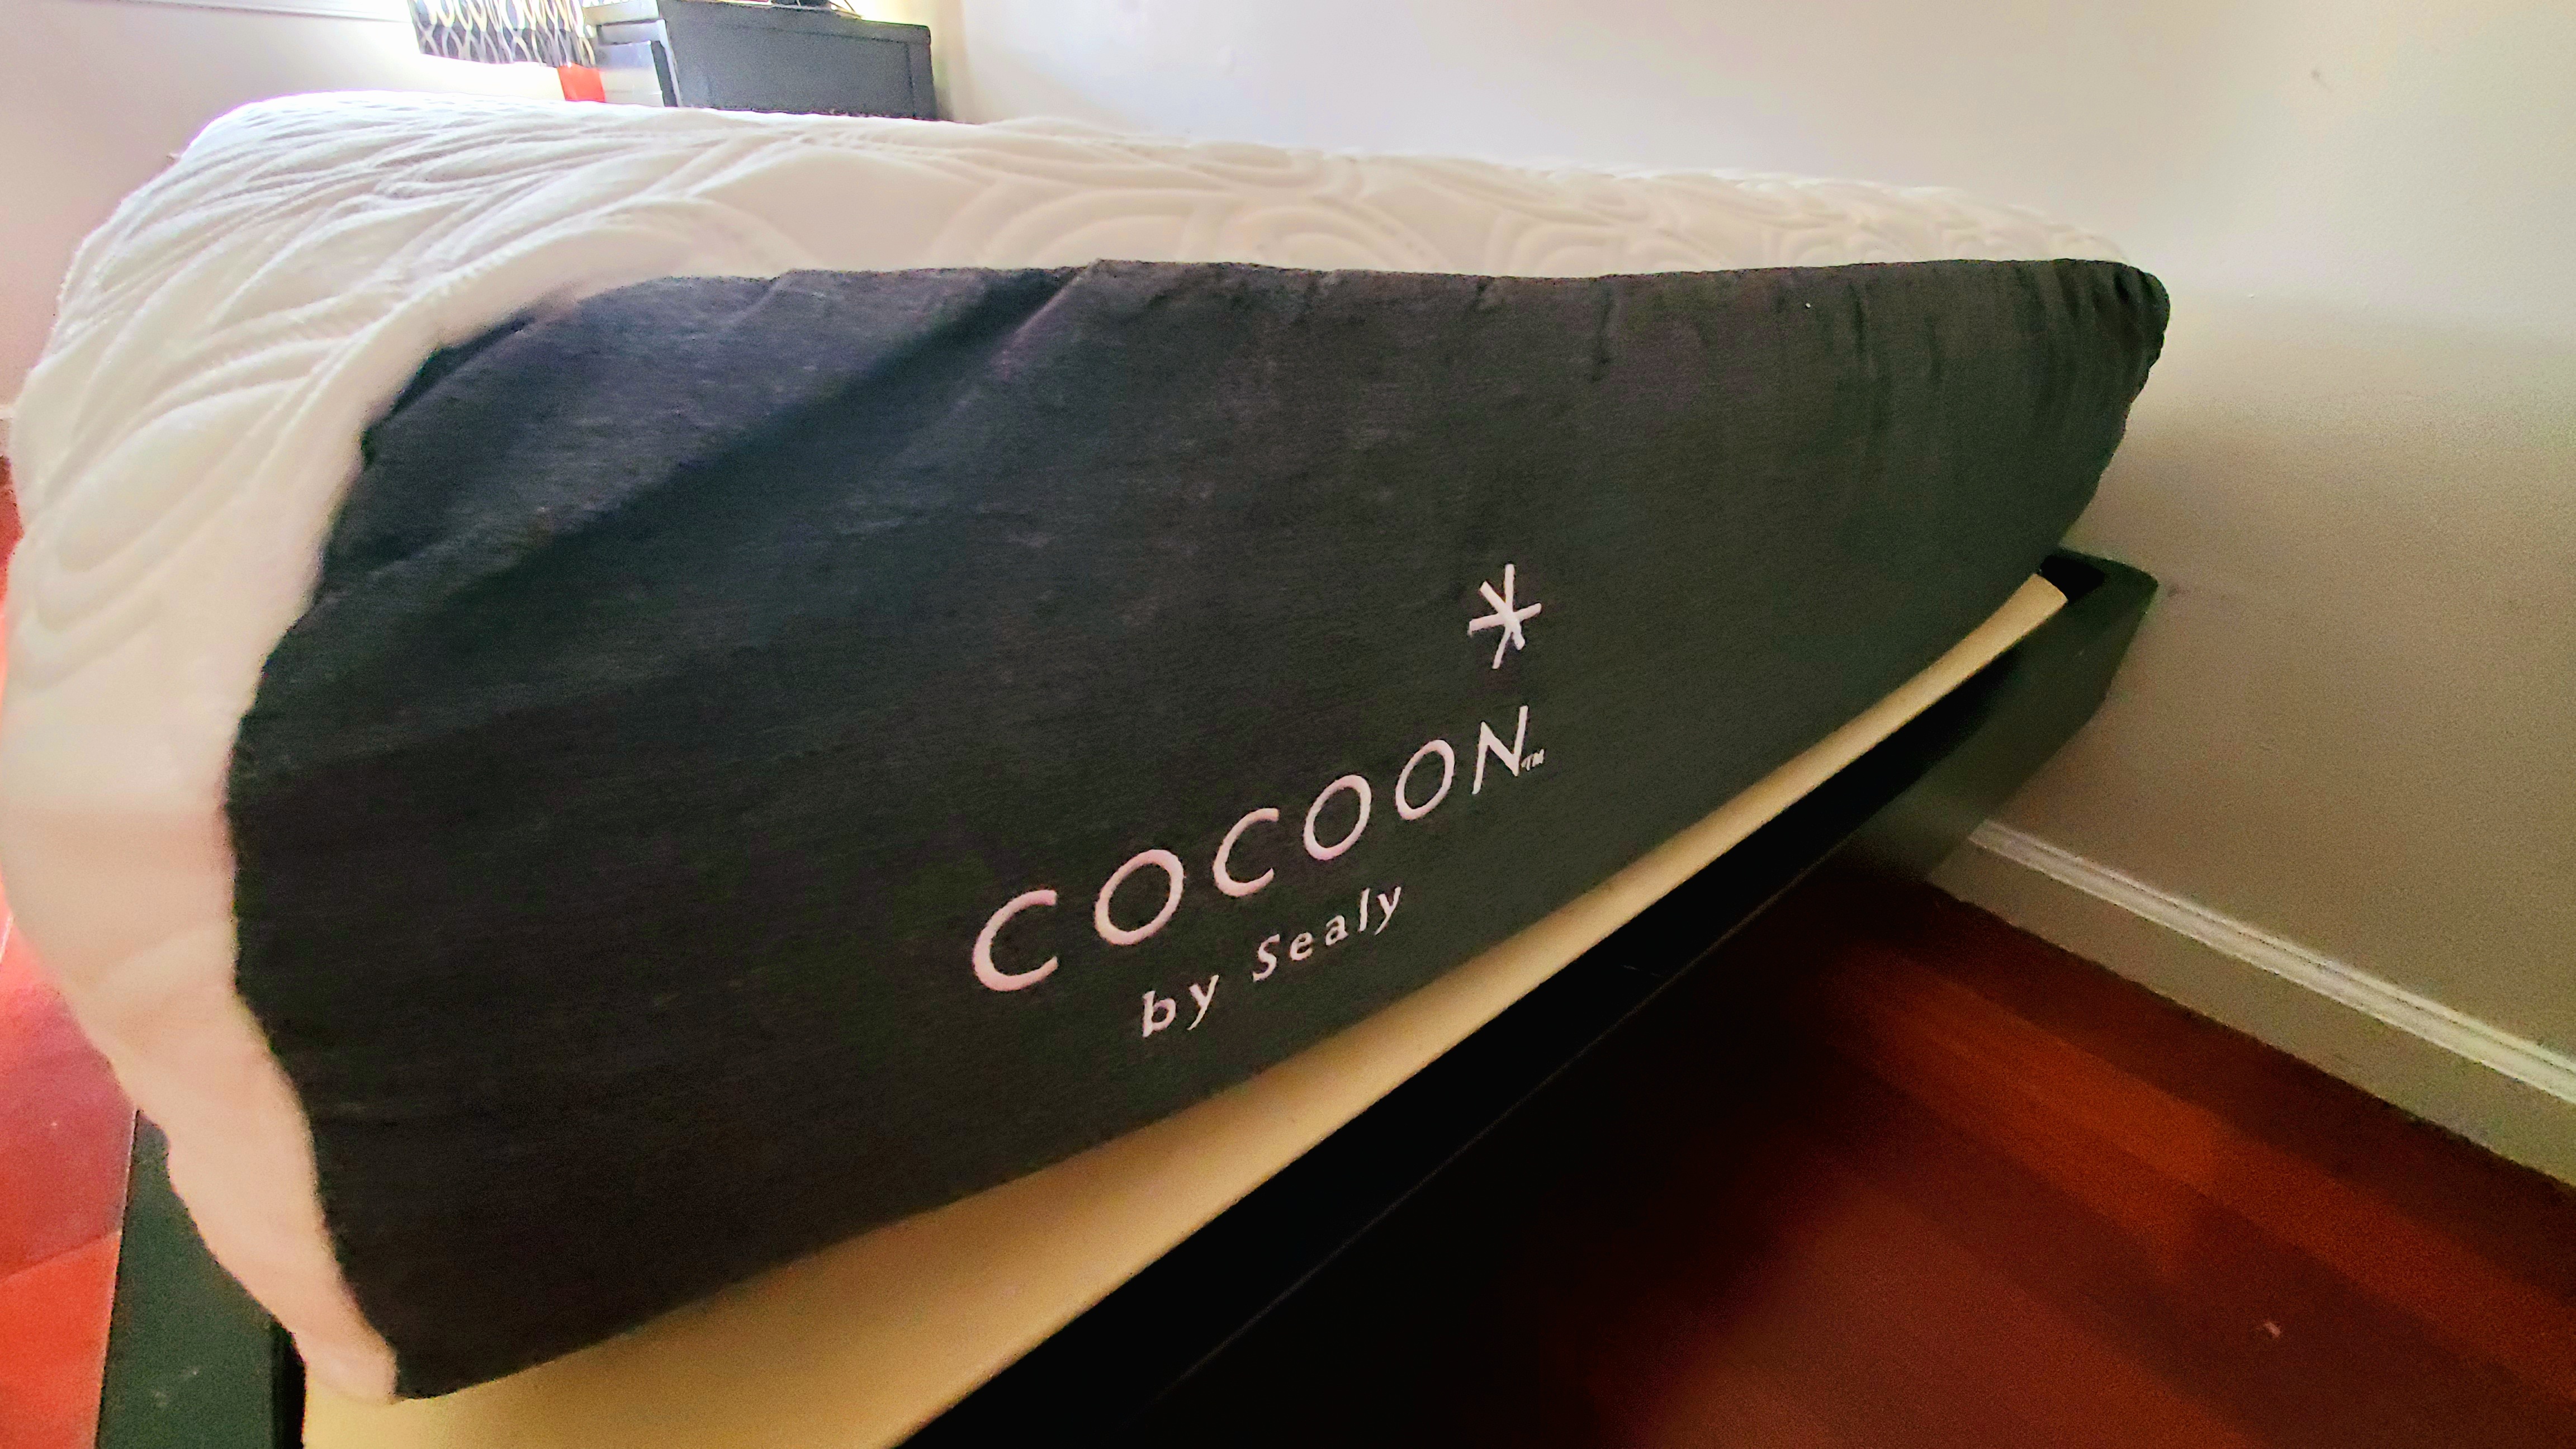 Cocoon by Sealy Chill mattress review, featuring a closeup of the edge of the mattress on a platform bed